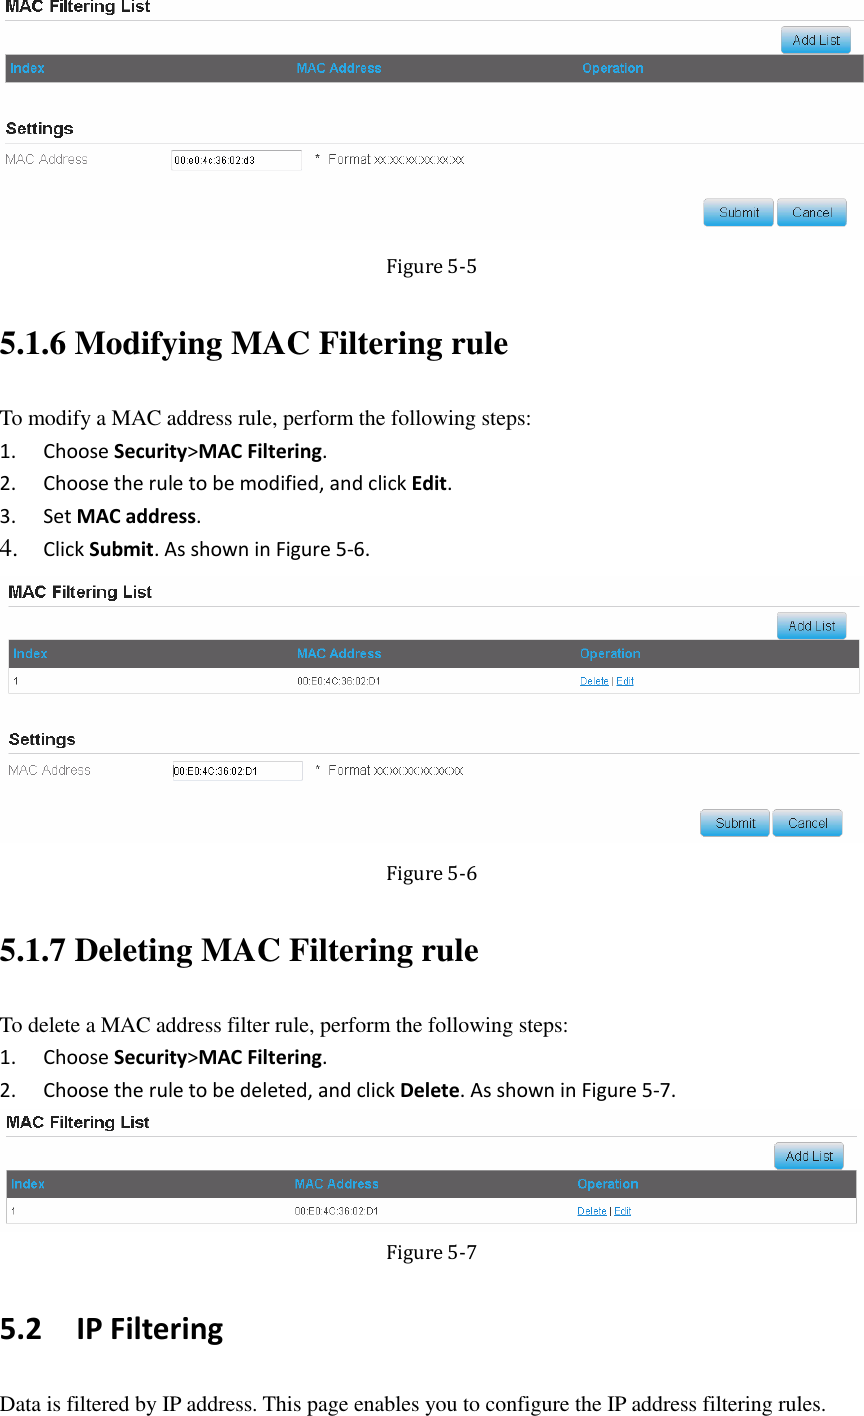    Figure 5-5 5.1.6 Modifying MAC Filtering rule To modify a MAC address rule, perform the following steps: 1. Choose Security&gt;MAC Filtering. 2. Choose the rule to be modified, and click Edit. 3. Set MAC address. 4. Click Submit. As shown in Figure 5-6.  Figure 5-6 5.1.7 Deleting MAC Filtering rule To delete a MAC address filter rule, perform the following steps: 1. Choose Security&gt;MAC Filtering. 2. Choose the rule to be deleted, and click Delete. As shown in Figure 5-7.  Figure 5-7 5.2   IP Filtering Data is filtered by IP address. This page enables you to configure the IP address filtering rules. 